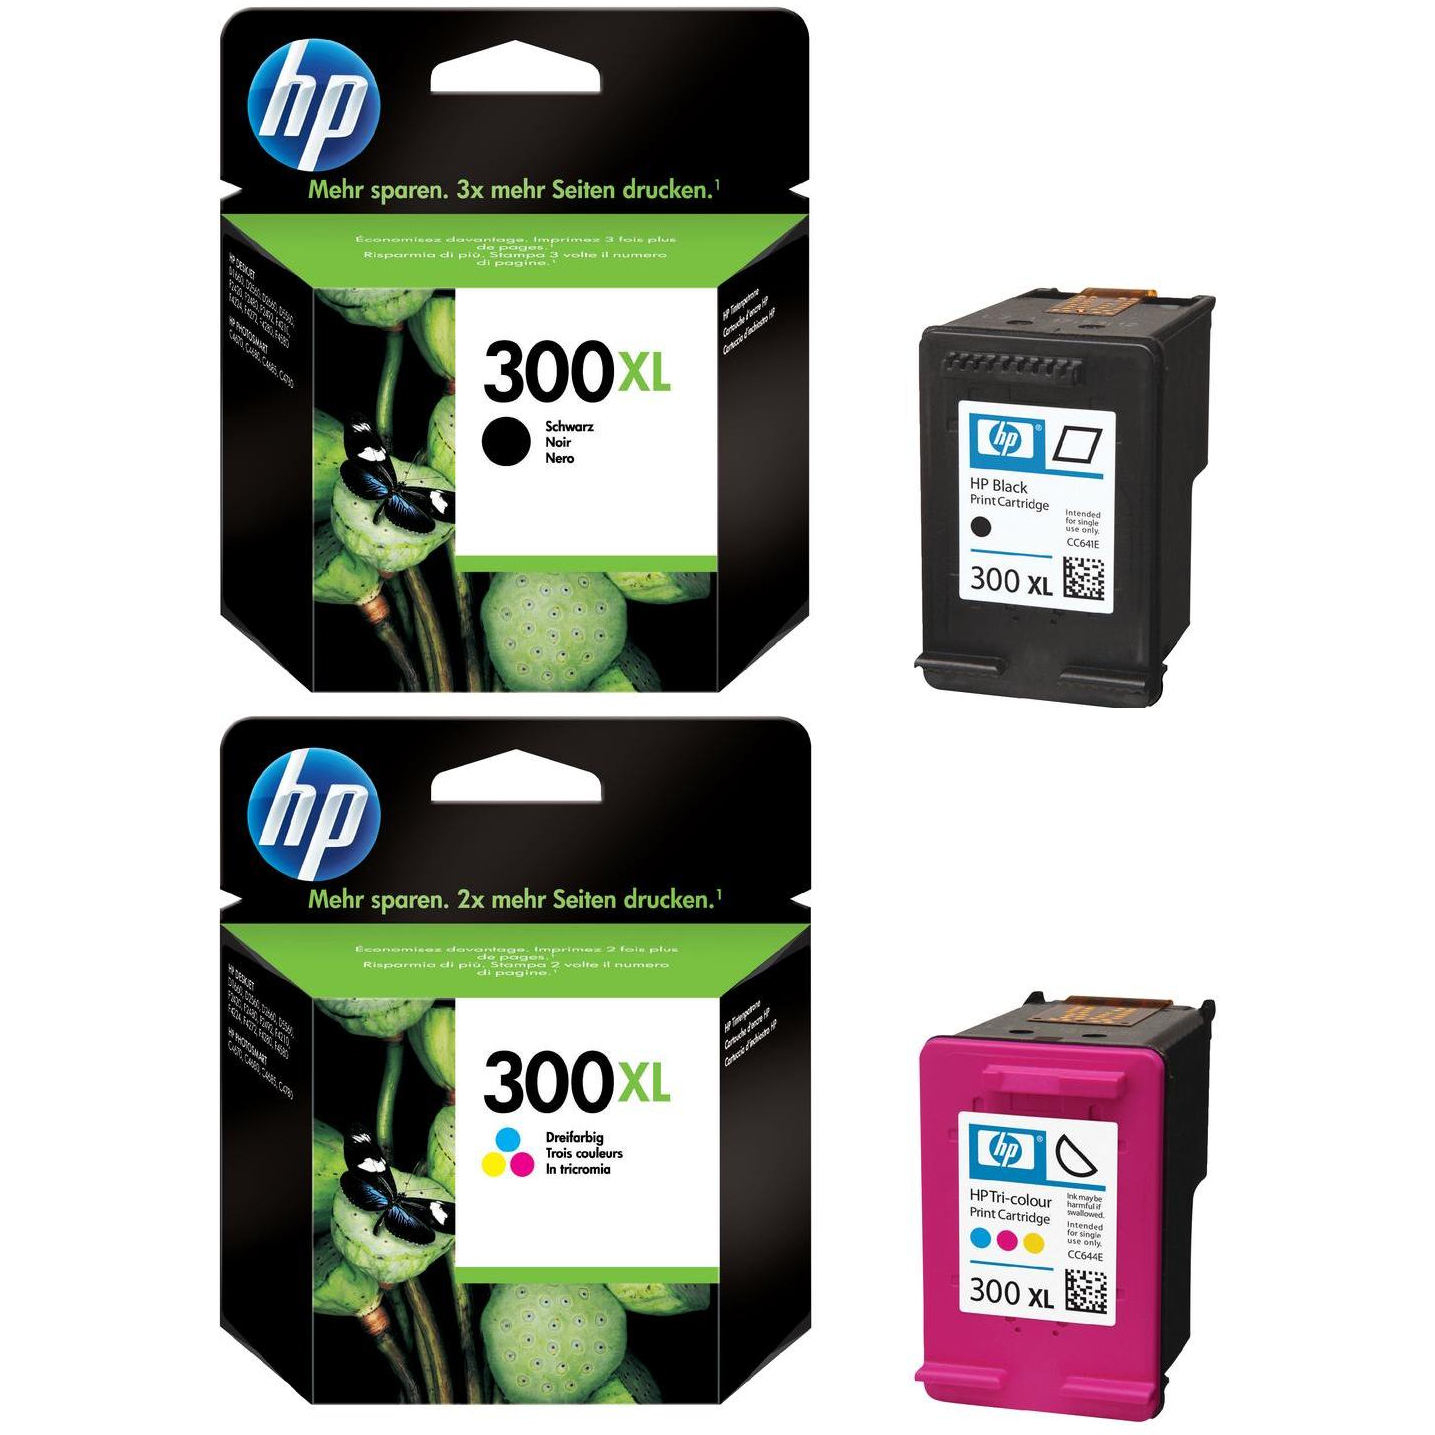 Related to Deskjet CB656B Ink: HP-300XL-Pack